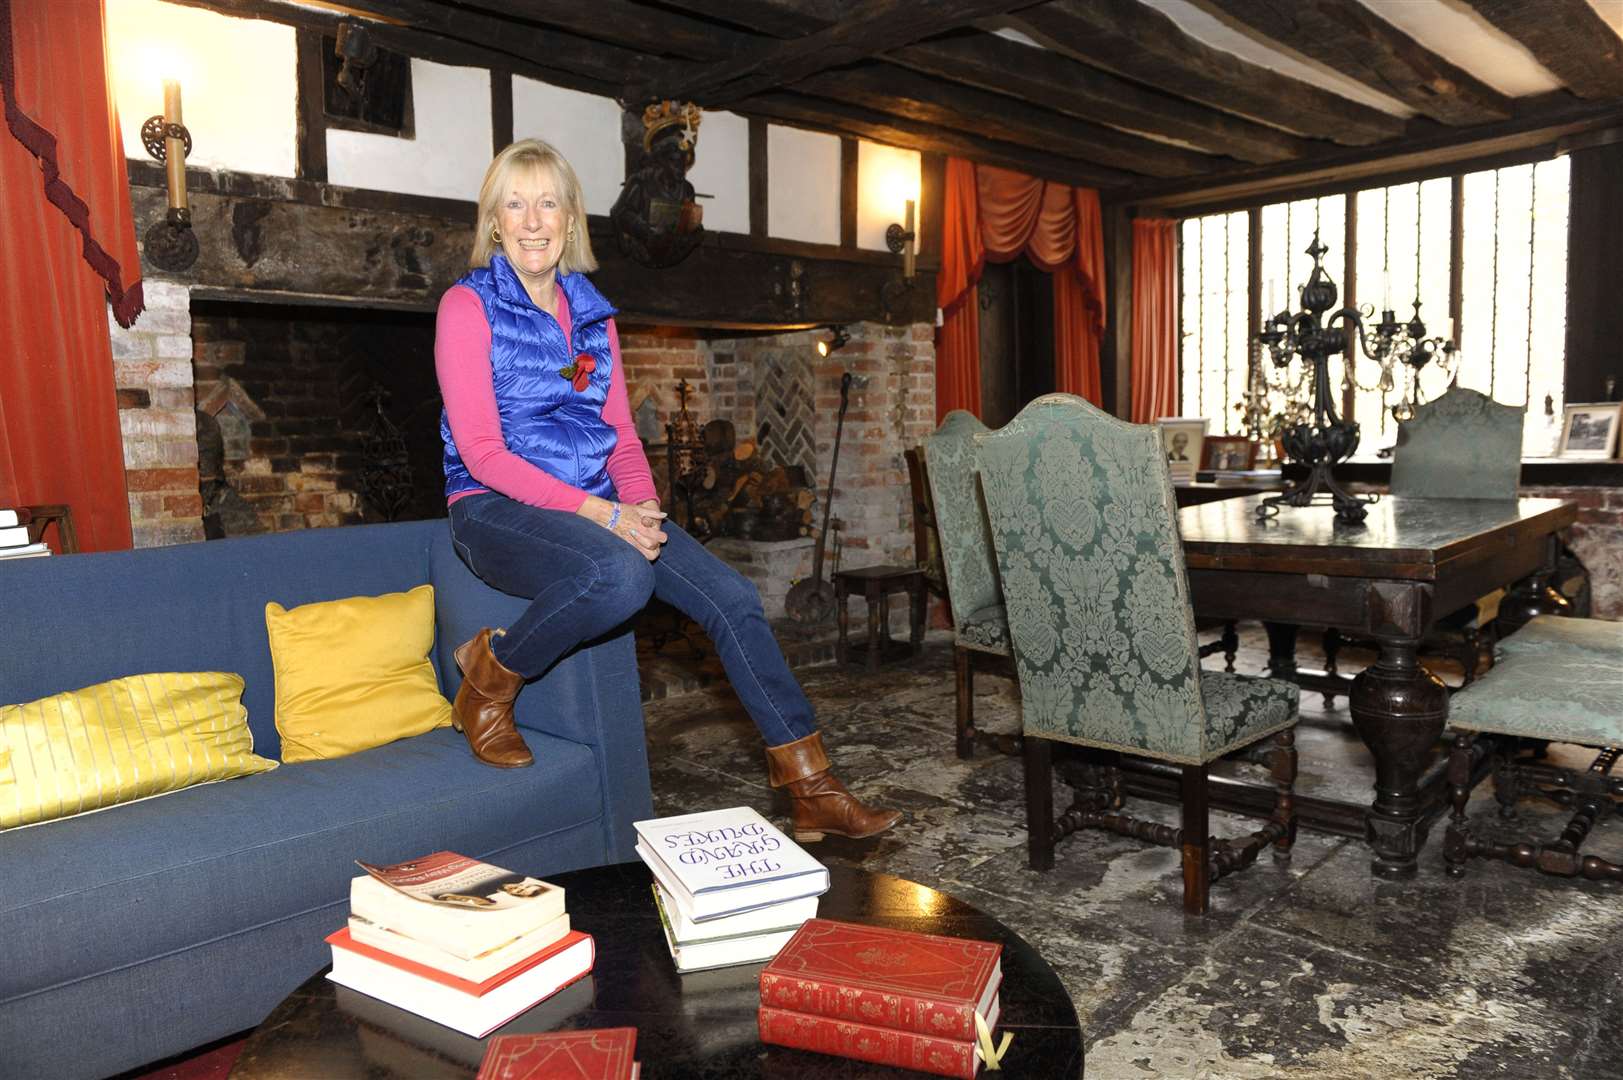 Russian Princess Olga Romanoff at her home at Provender House. Picture: Tony Flashman